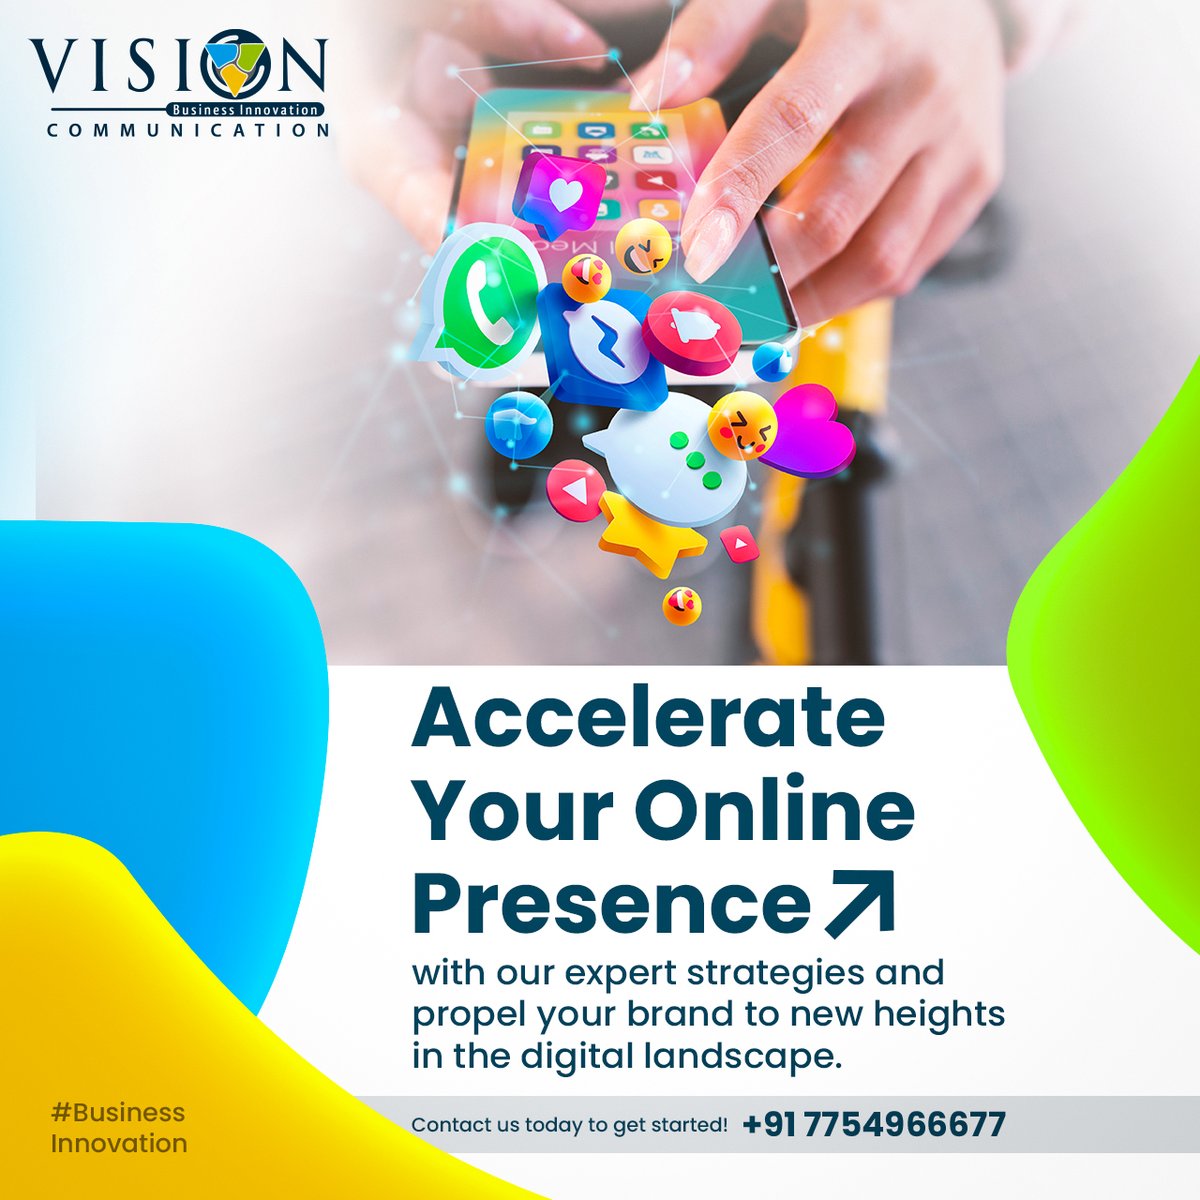 Accelerate Your Online Presence
Call Us for Free Consultant:- +91 7754966677
#Advertising #PR #Media #DigitalMarketing #socialmediamarketing #branding #marketingstrategy #webdesign #WebPromotion #graphicdesign
by #VisionCommunication #BusinessInnovation #GomtiNagar #Lucknow